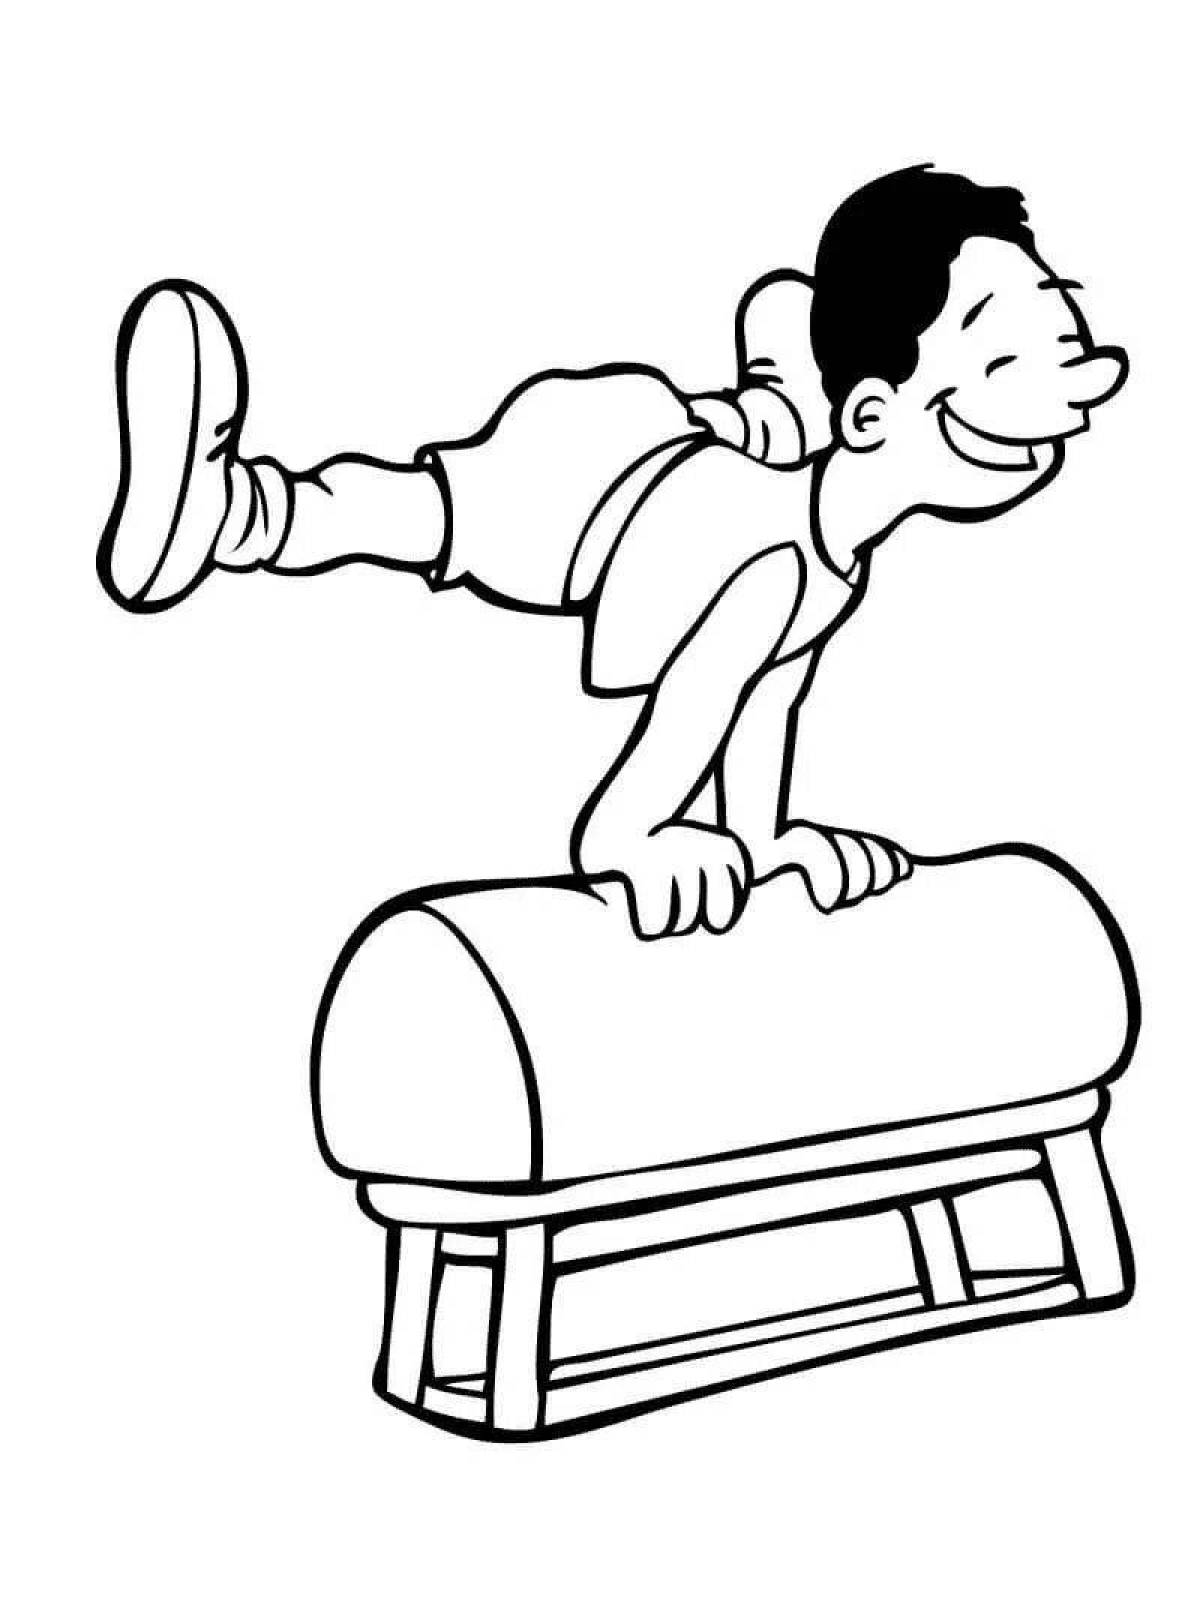 Exciting jumping coloring pages